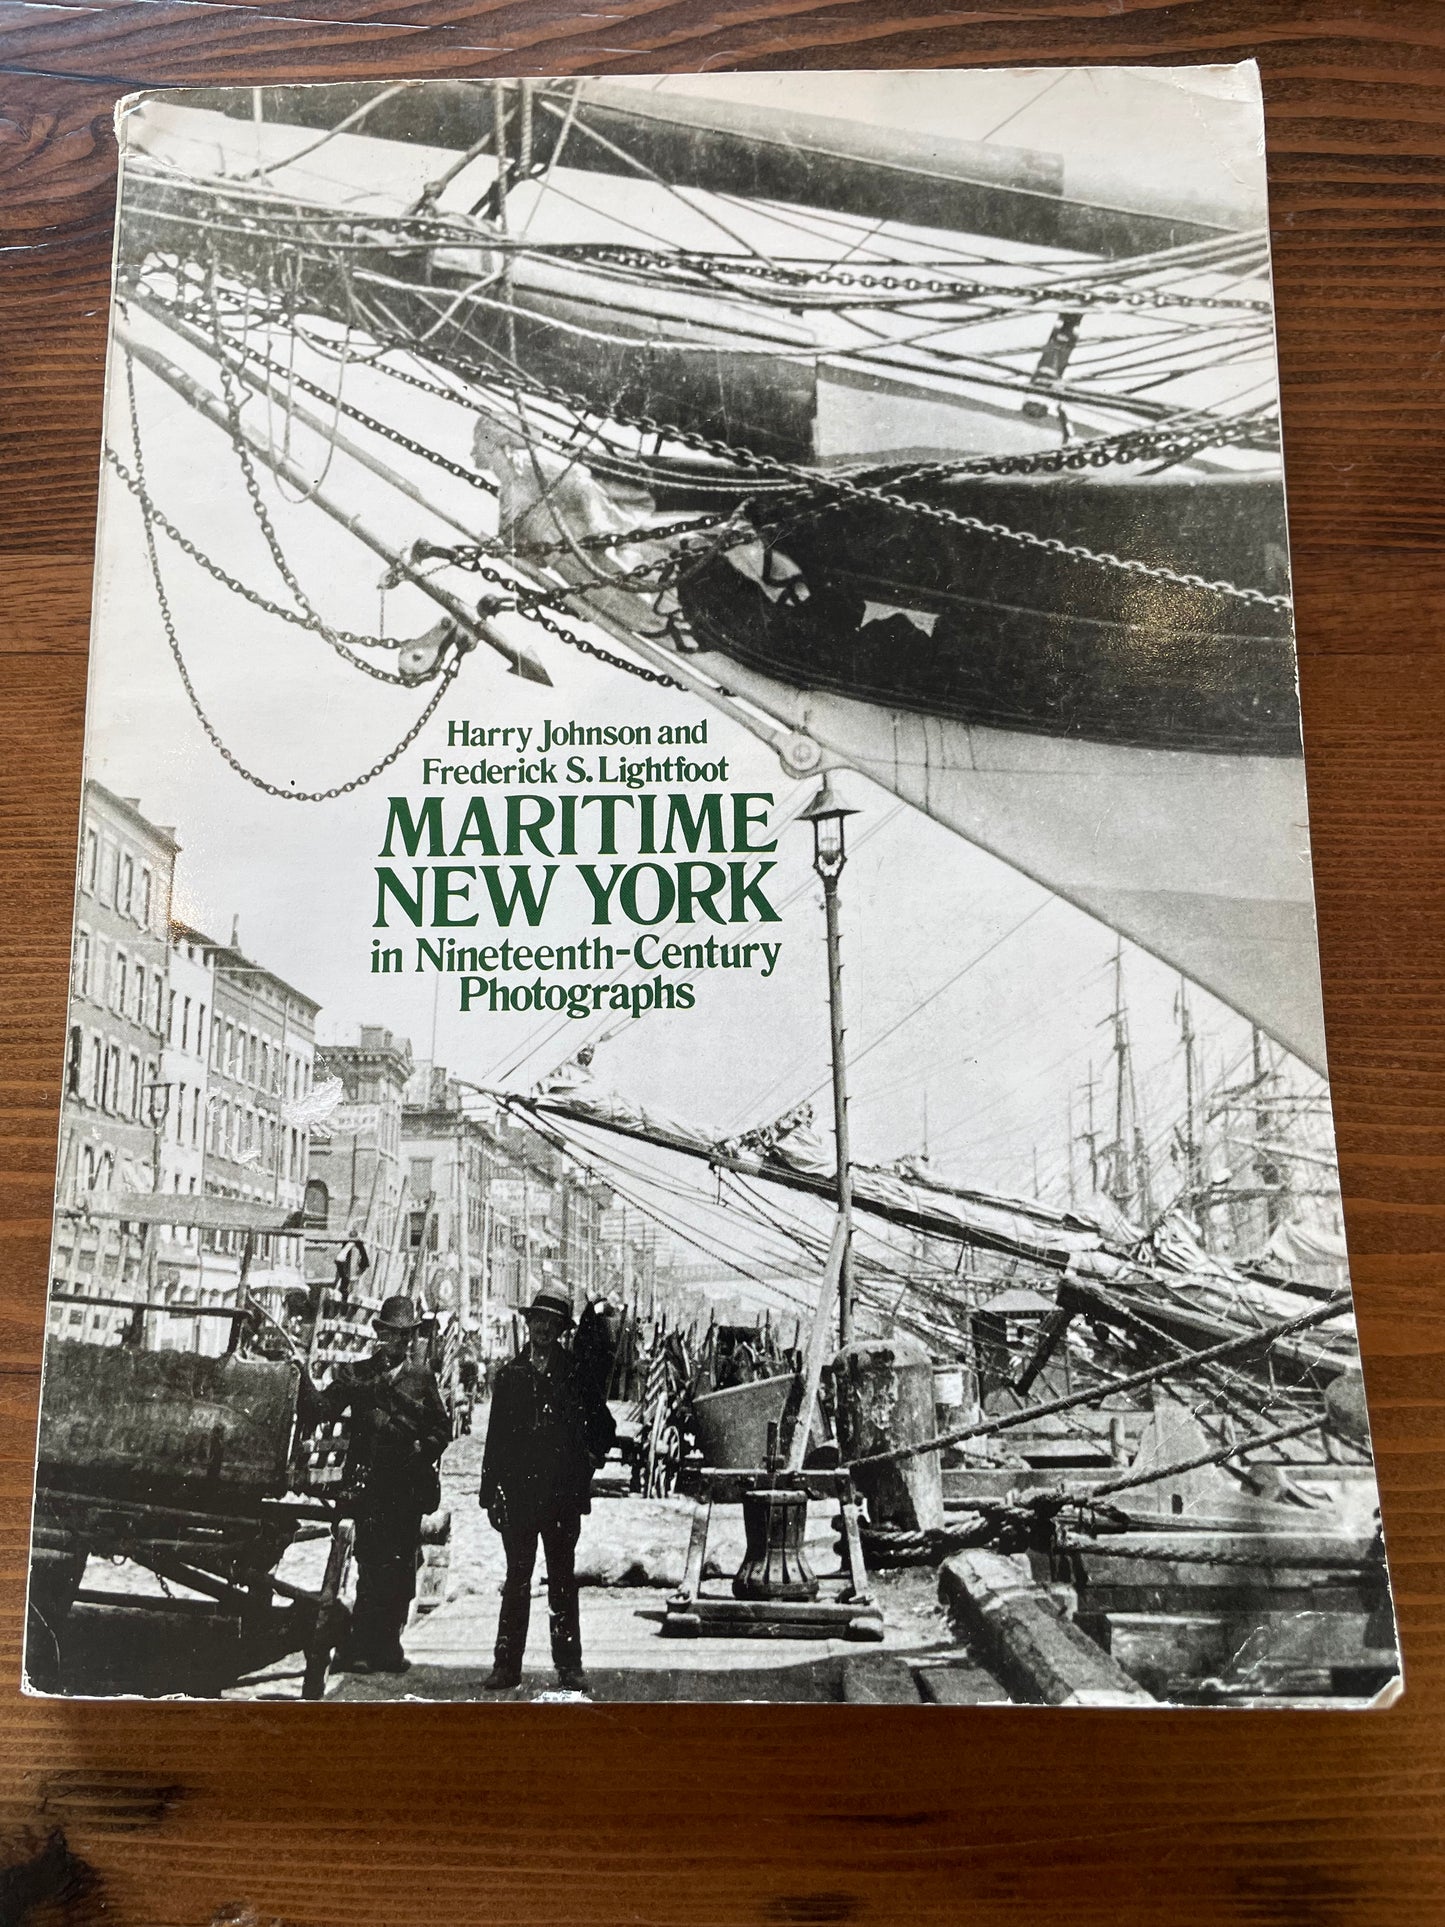 A picture of the front cover of "Maritime New York in 19th Century Photographs"